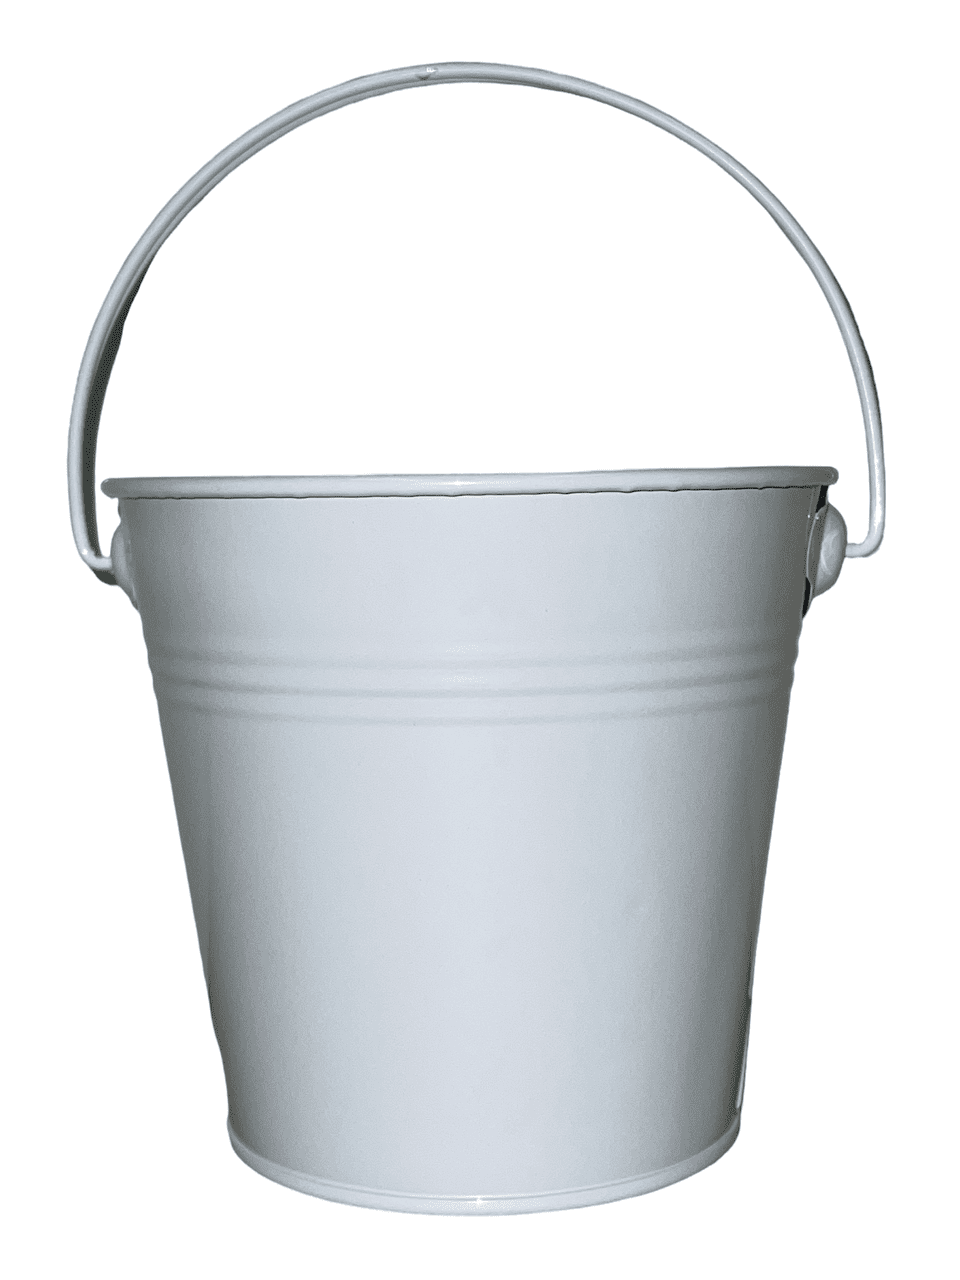 Colored Mini Metal Buckets - 3-Pack Colorful Tin Pails with